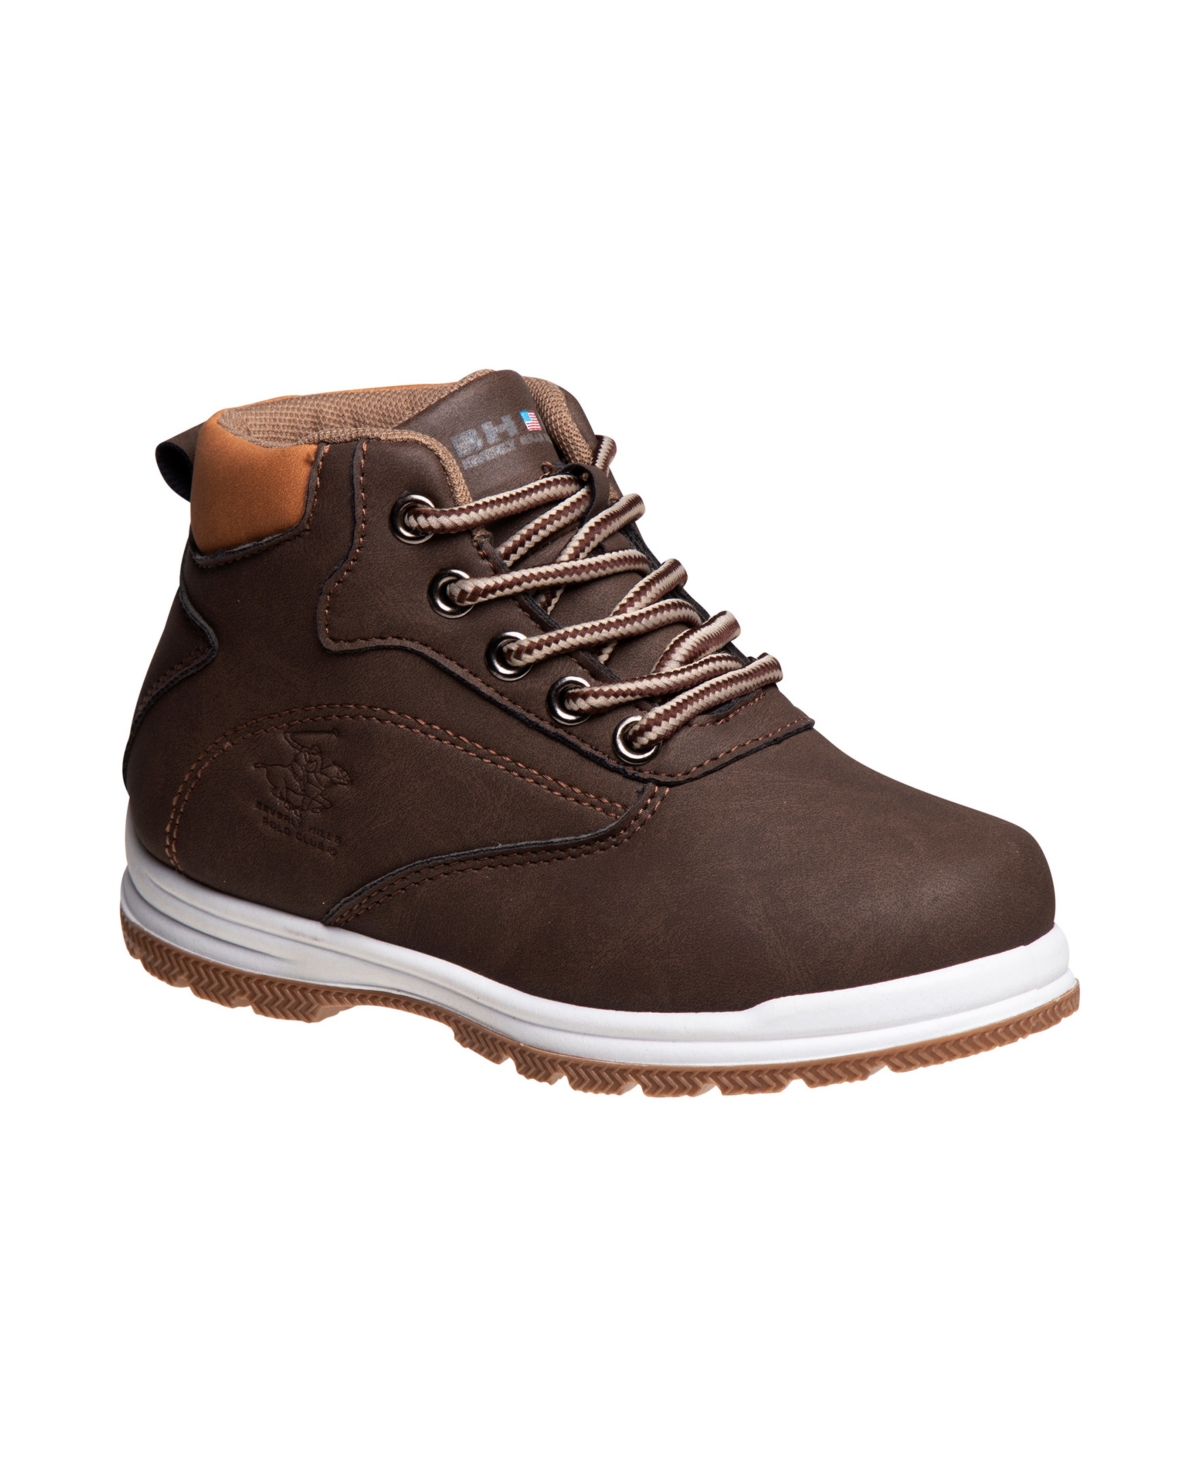 Beverly Hills Polo Club Babies' Toddler Hi-top Boots In Brown